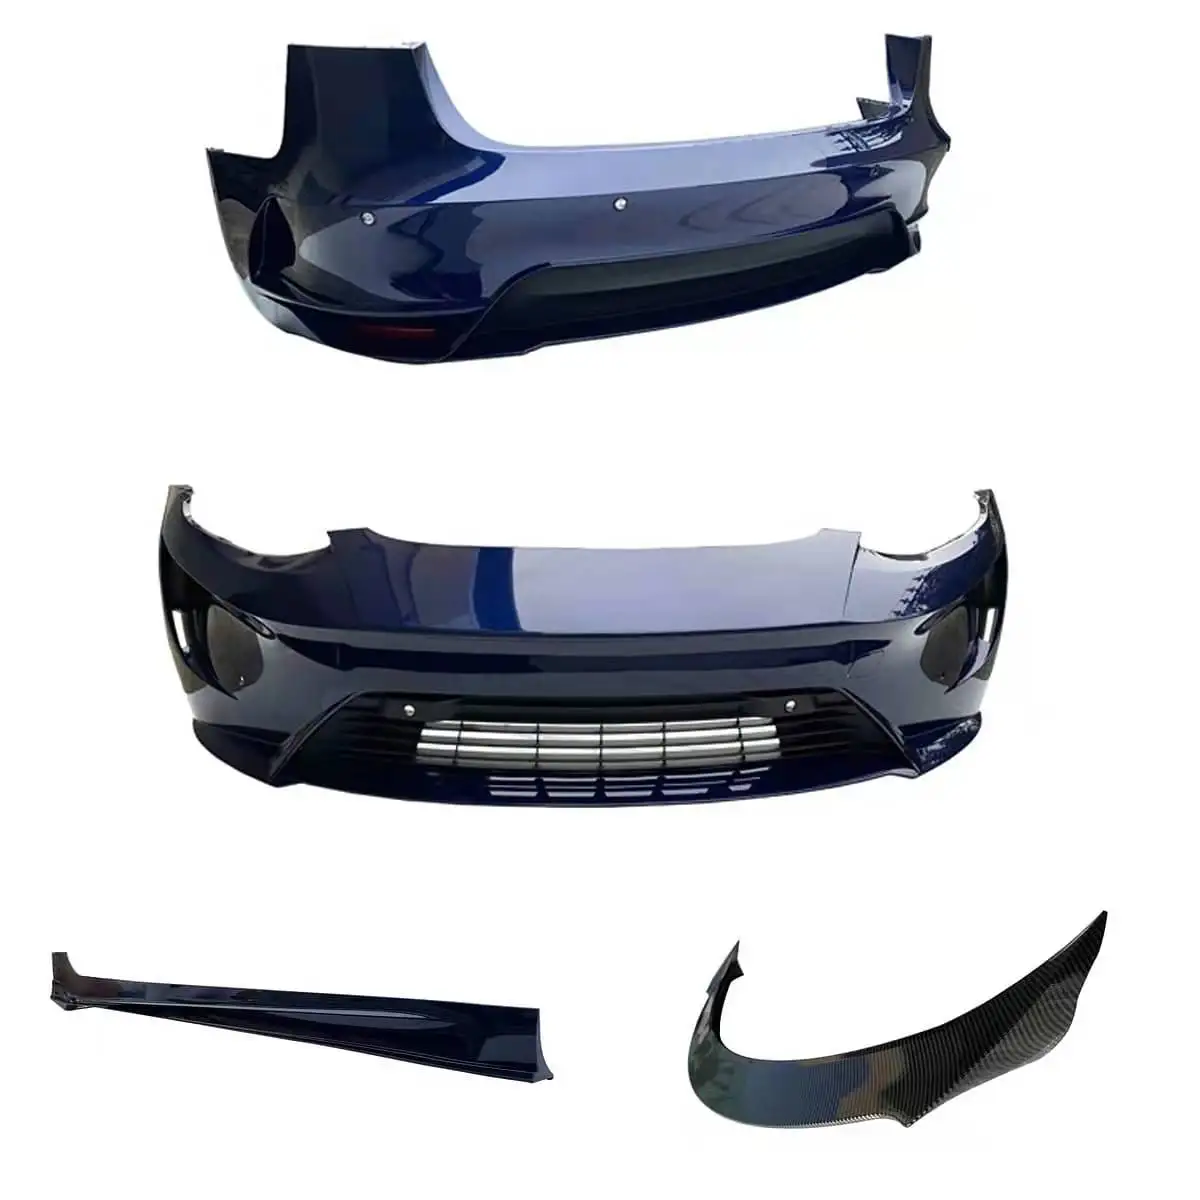 Model 3 body kit Assassin version for Tesla, High quality PP injection bumpers spoiler,side skirts,car accessories.